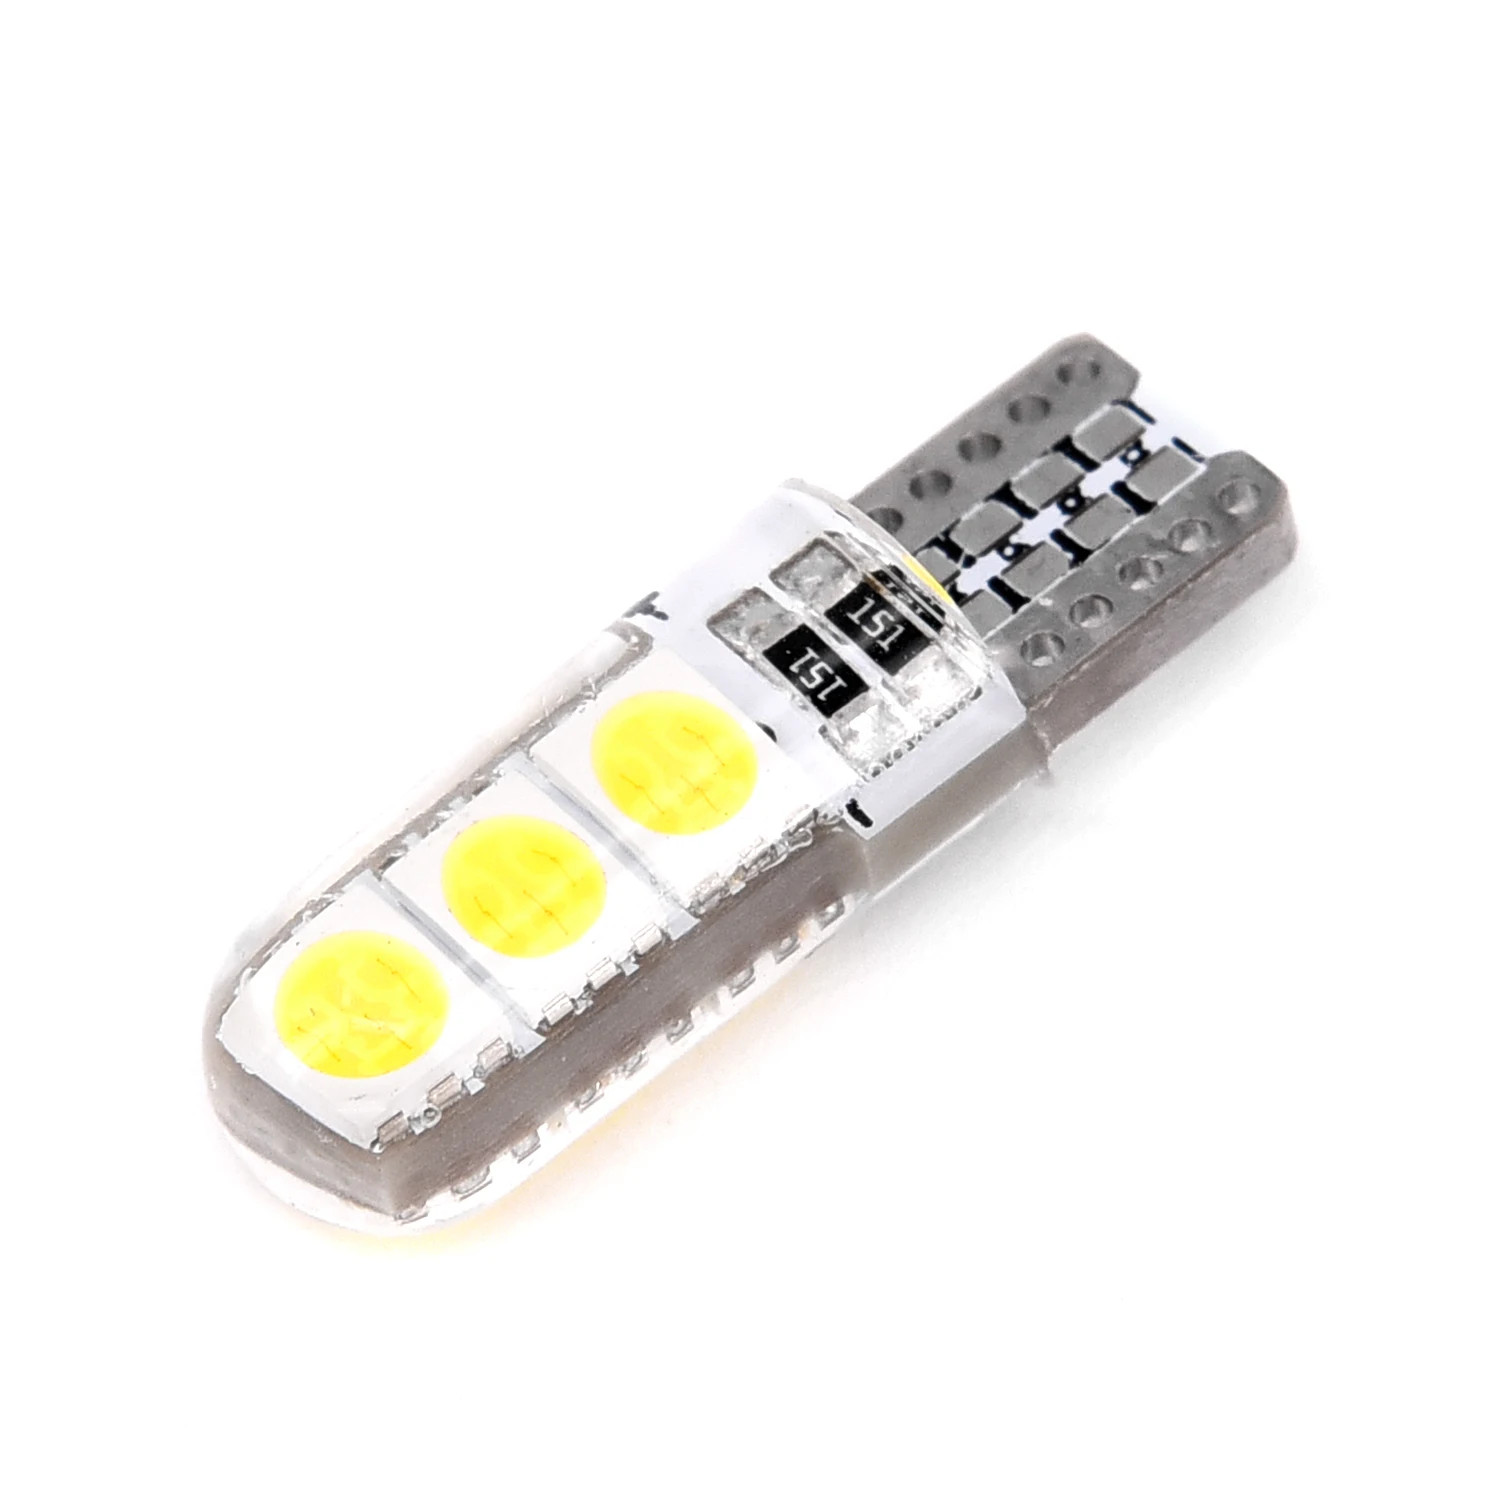 

Silicone Shell Canbus LED Lamp White 12V DC License Plate Dome 10pcs T10 194 W5W Car T10-5050-6SMD Super Bright